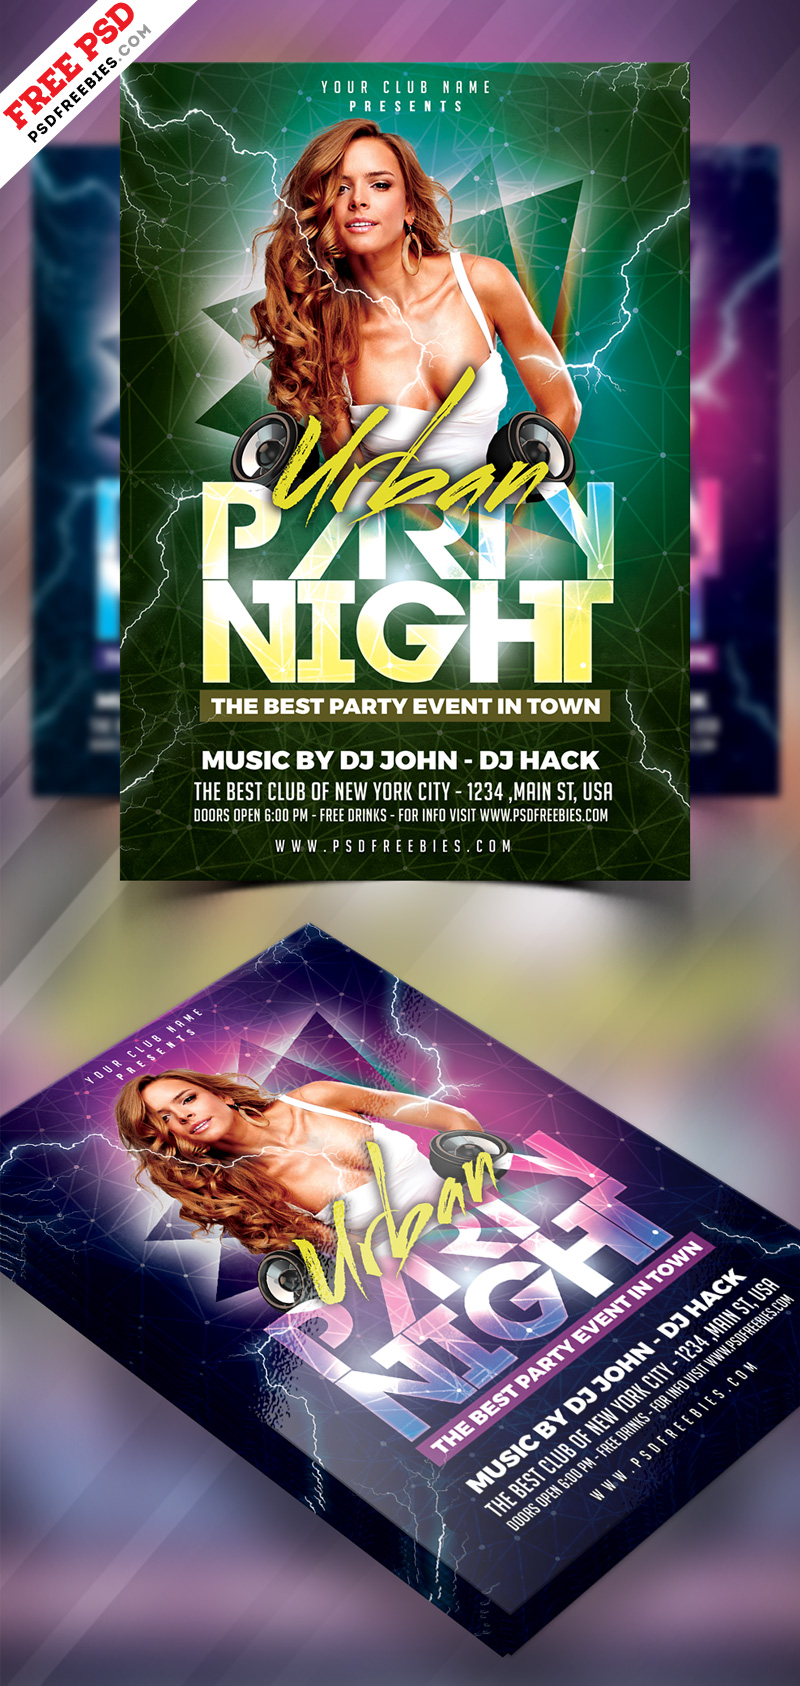 Free Party Flyer Design PSD Template